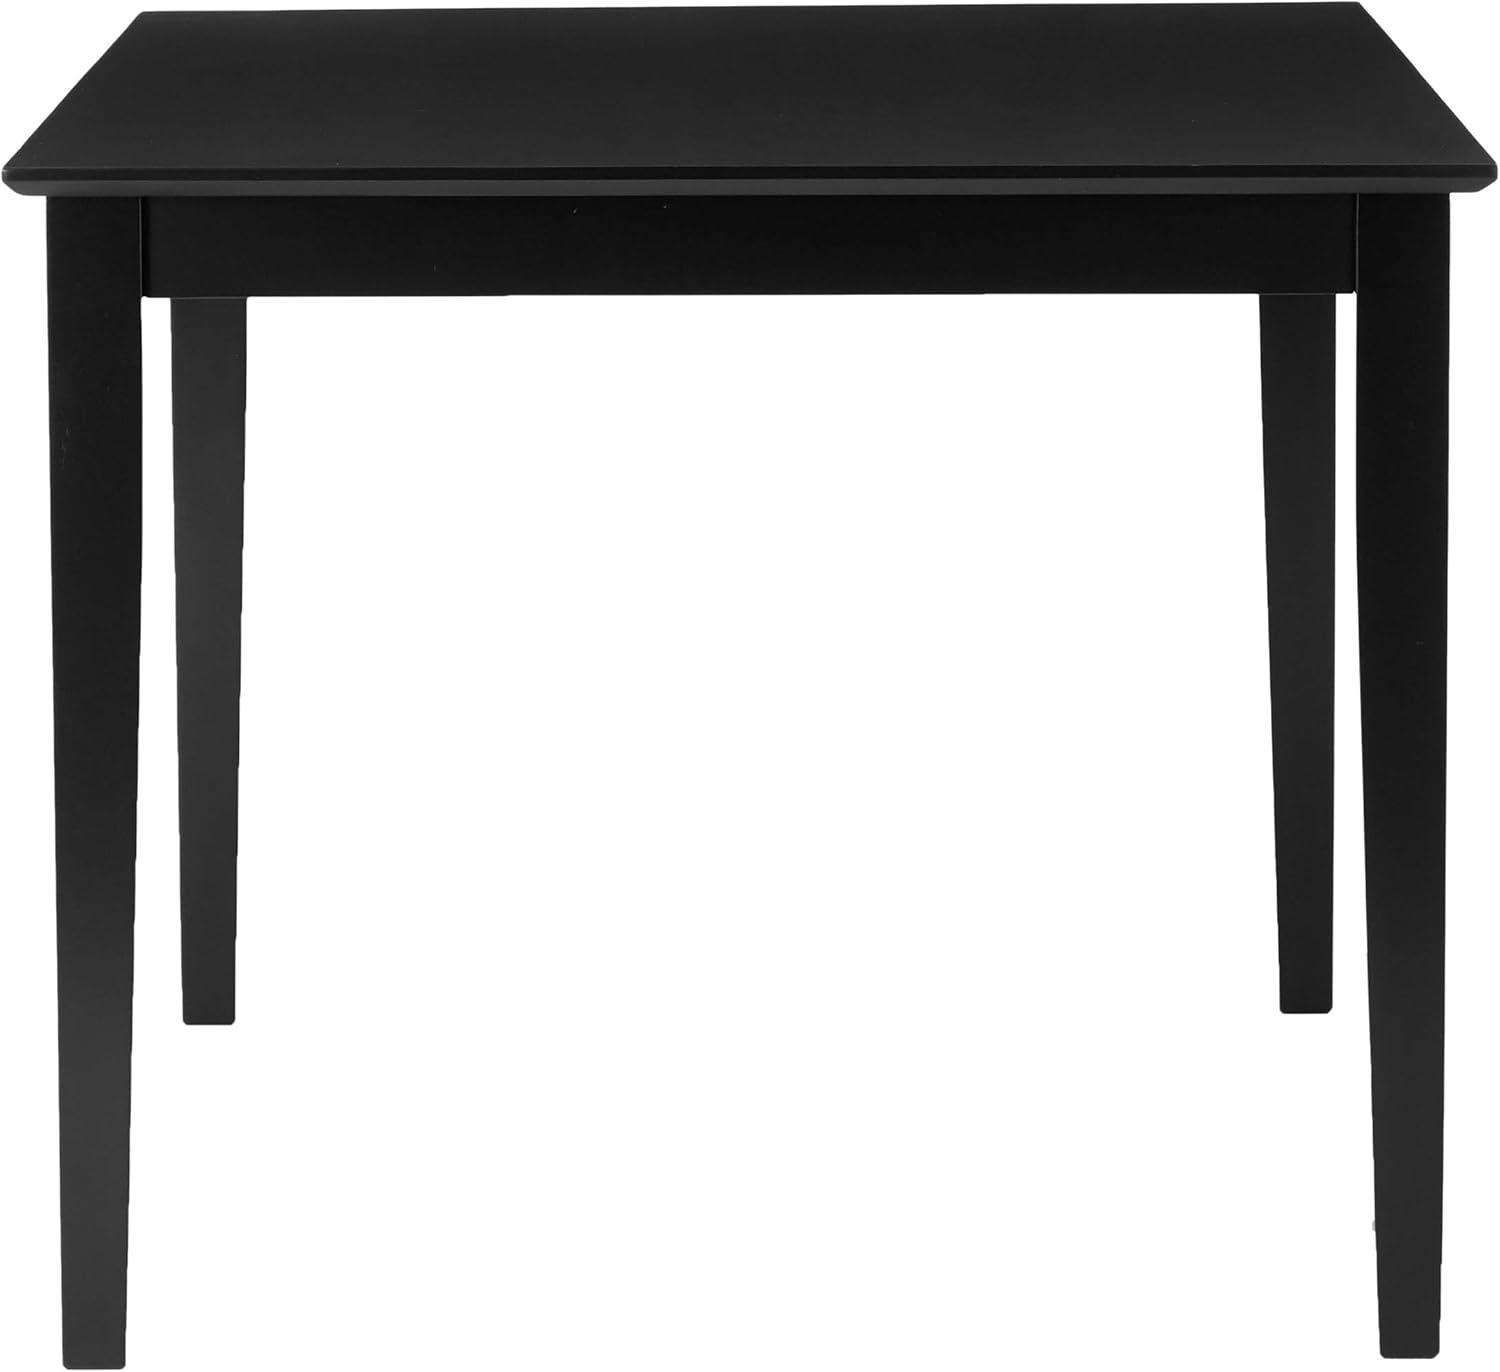 Elegant Transitional Solid Wood Dining Table with Shaker Legs - Black